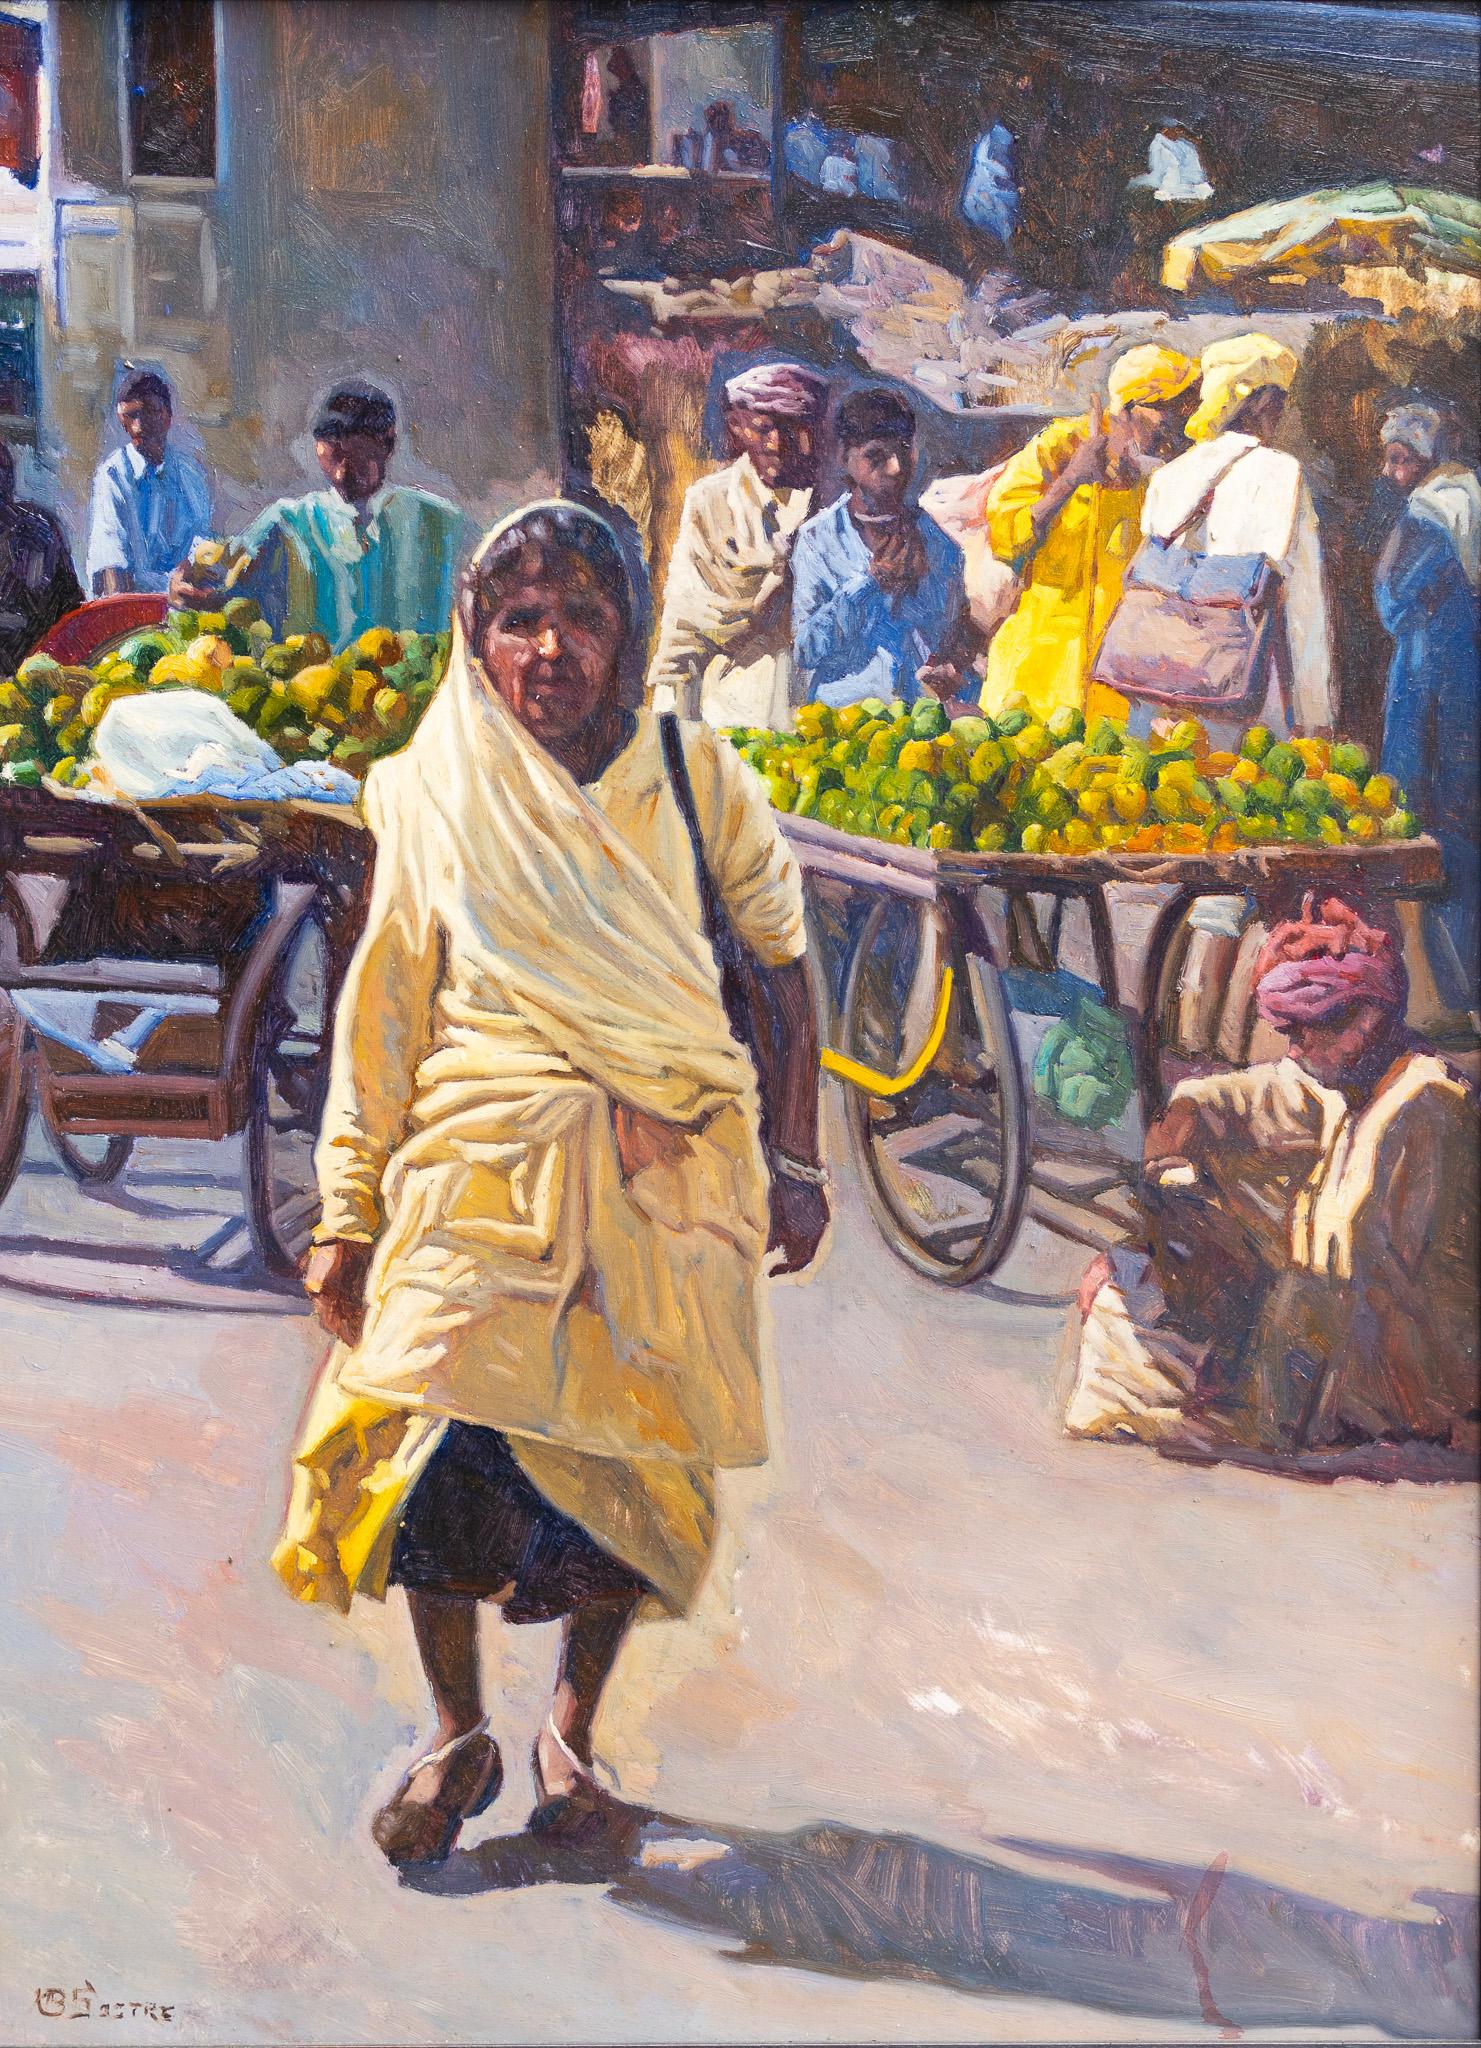 Bartolome Sastre Portrait Painting - "Indian Woman" Street Scene in an Indian Market